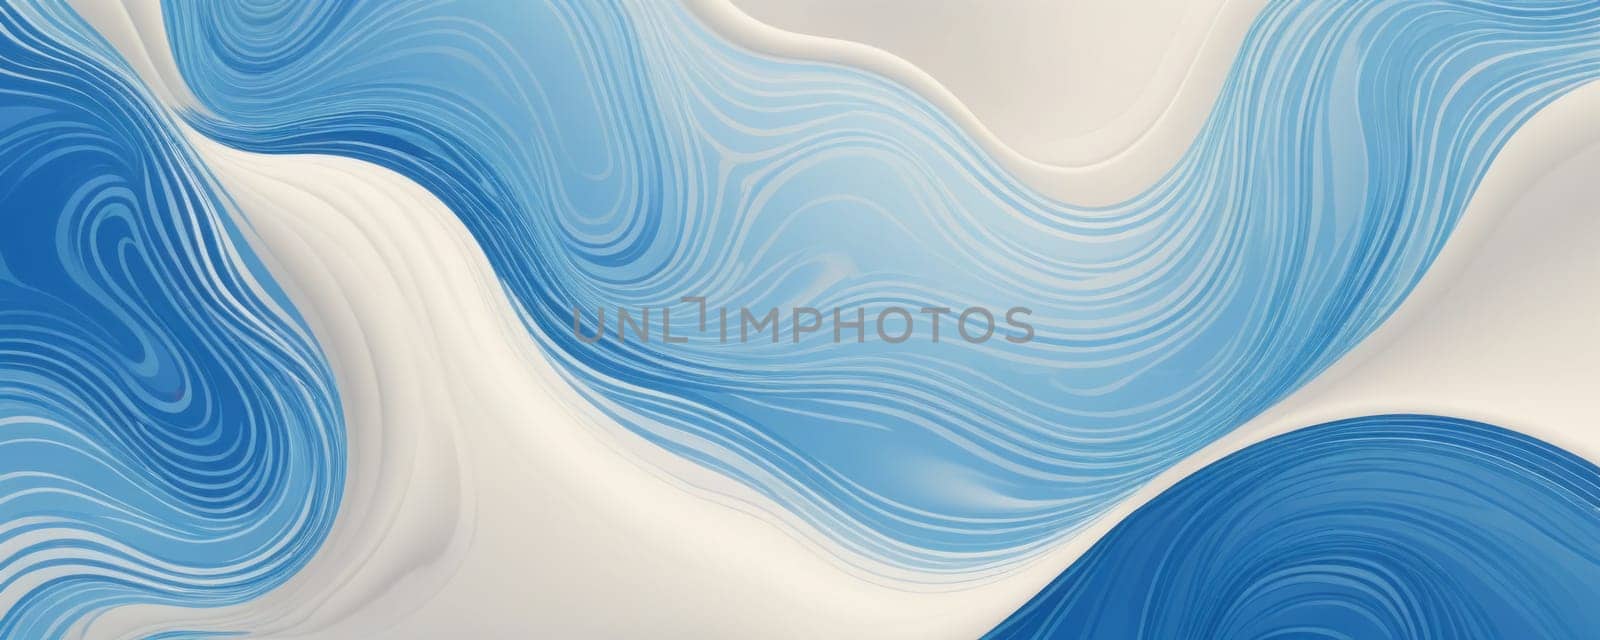 Marbled Shapes in White Alice blue by nkotlyar